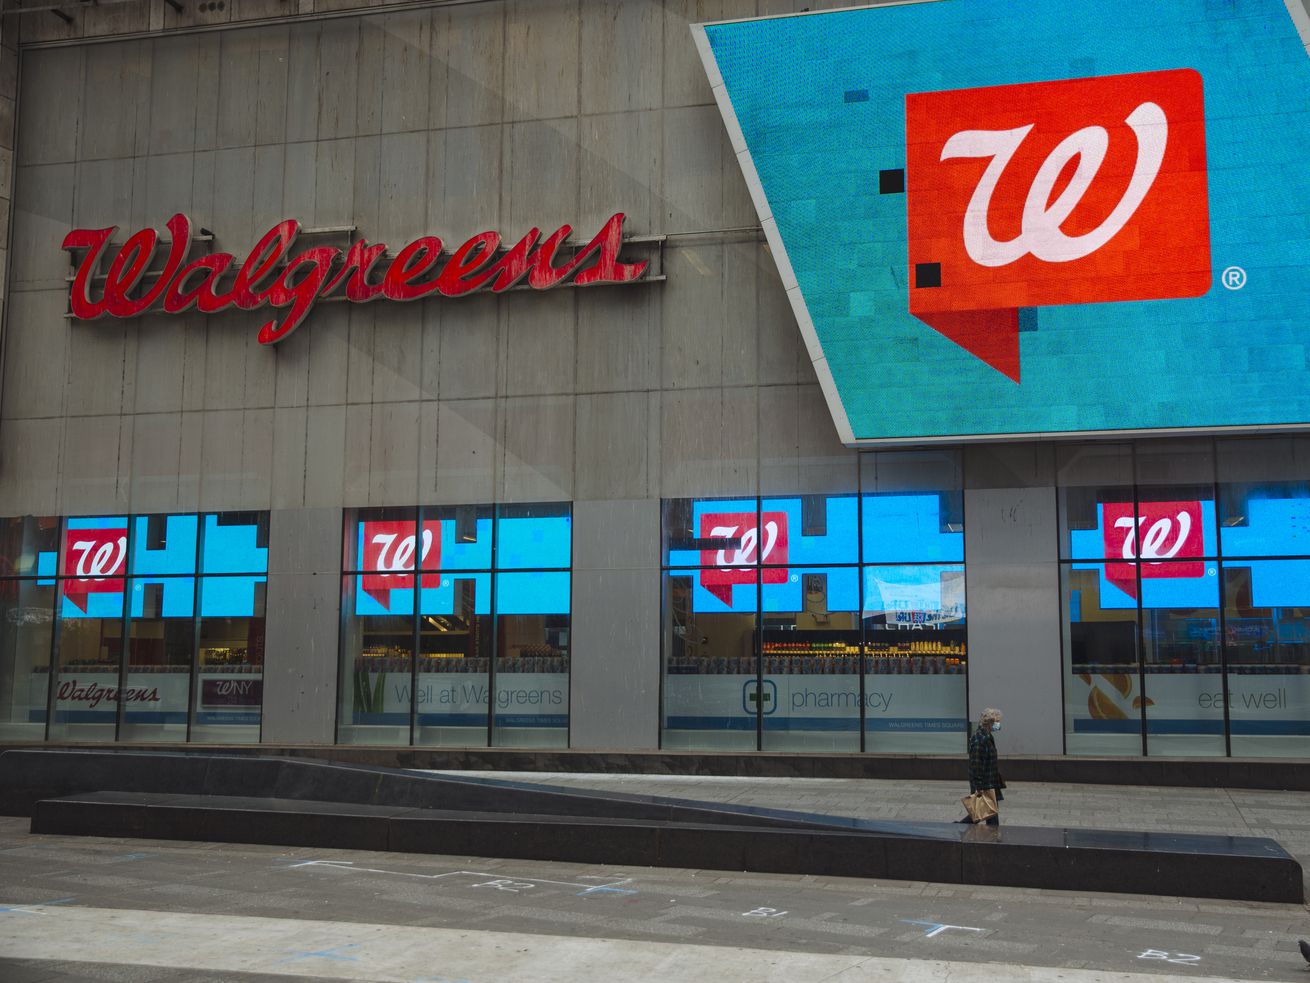 The exterior of a Walgreens store in Times Square, New York.